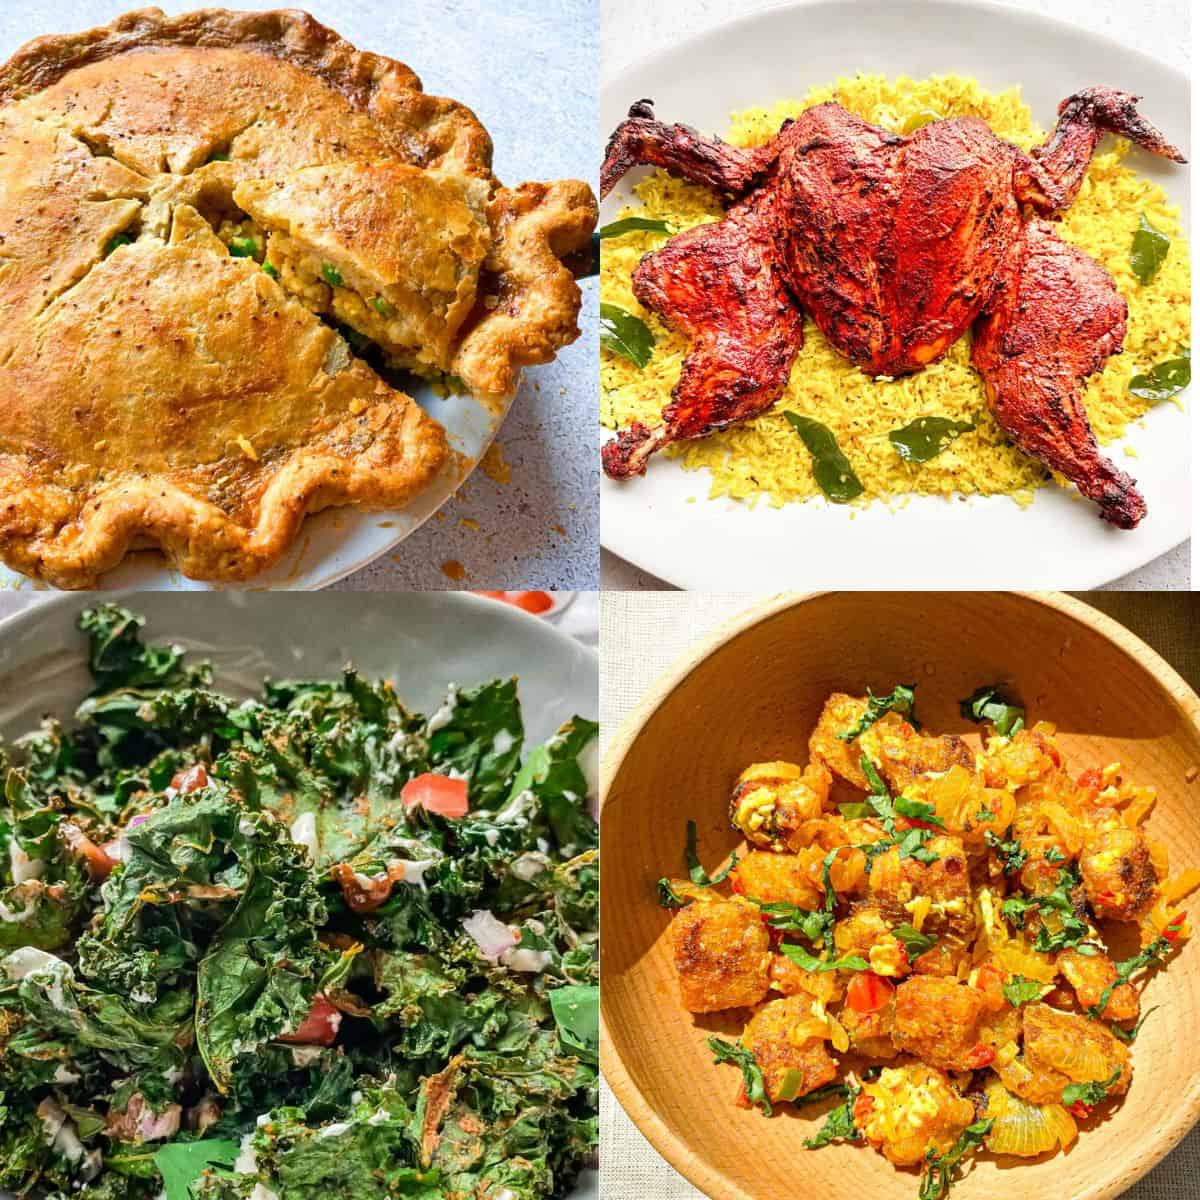 Indian Thanksgiving Menu photo with four dishes. Top left is samosa pot pie, top right is oven baked tandoori chicken, bottom left is crispy kale chaat, and bottom right is indian inspired stuffing.